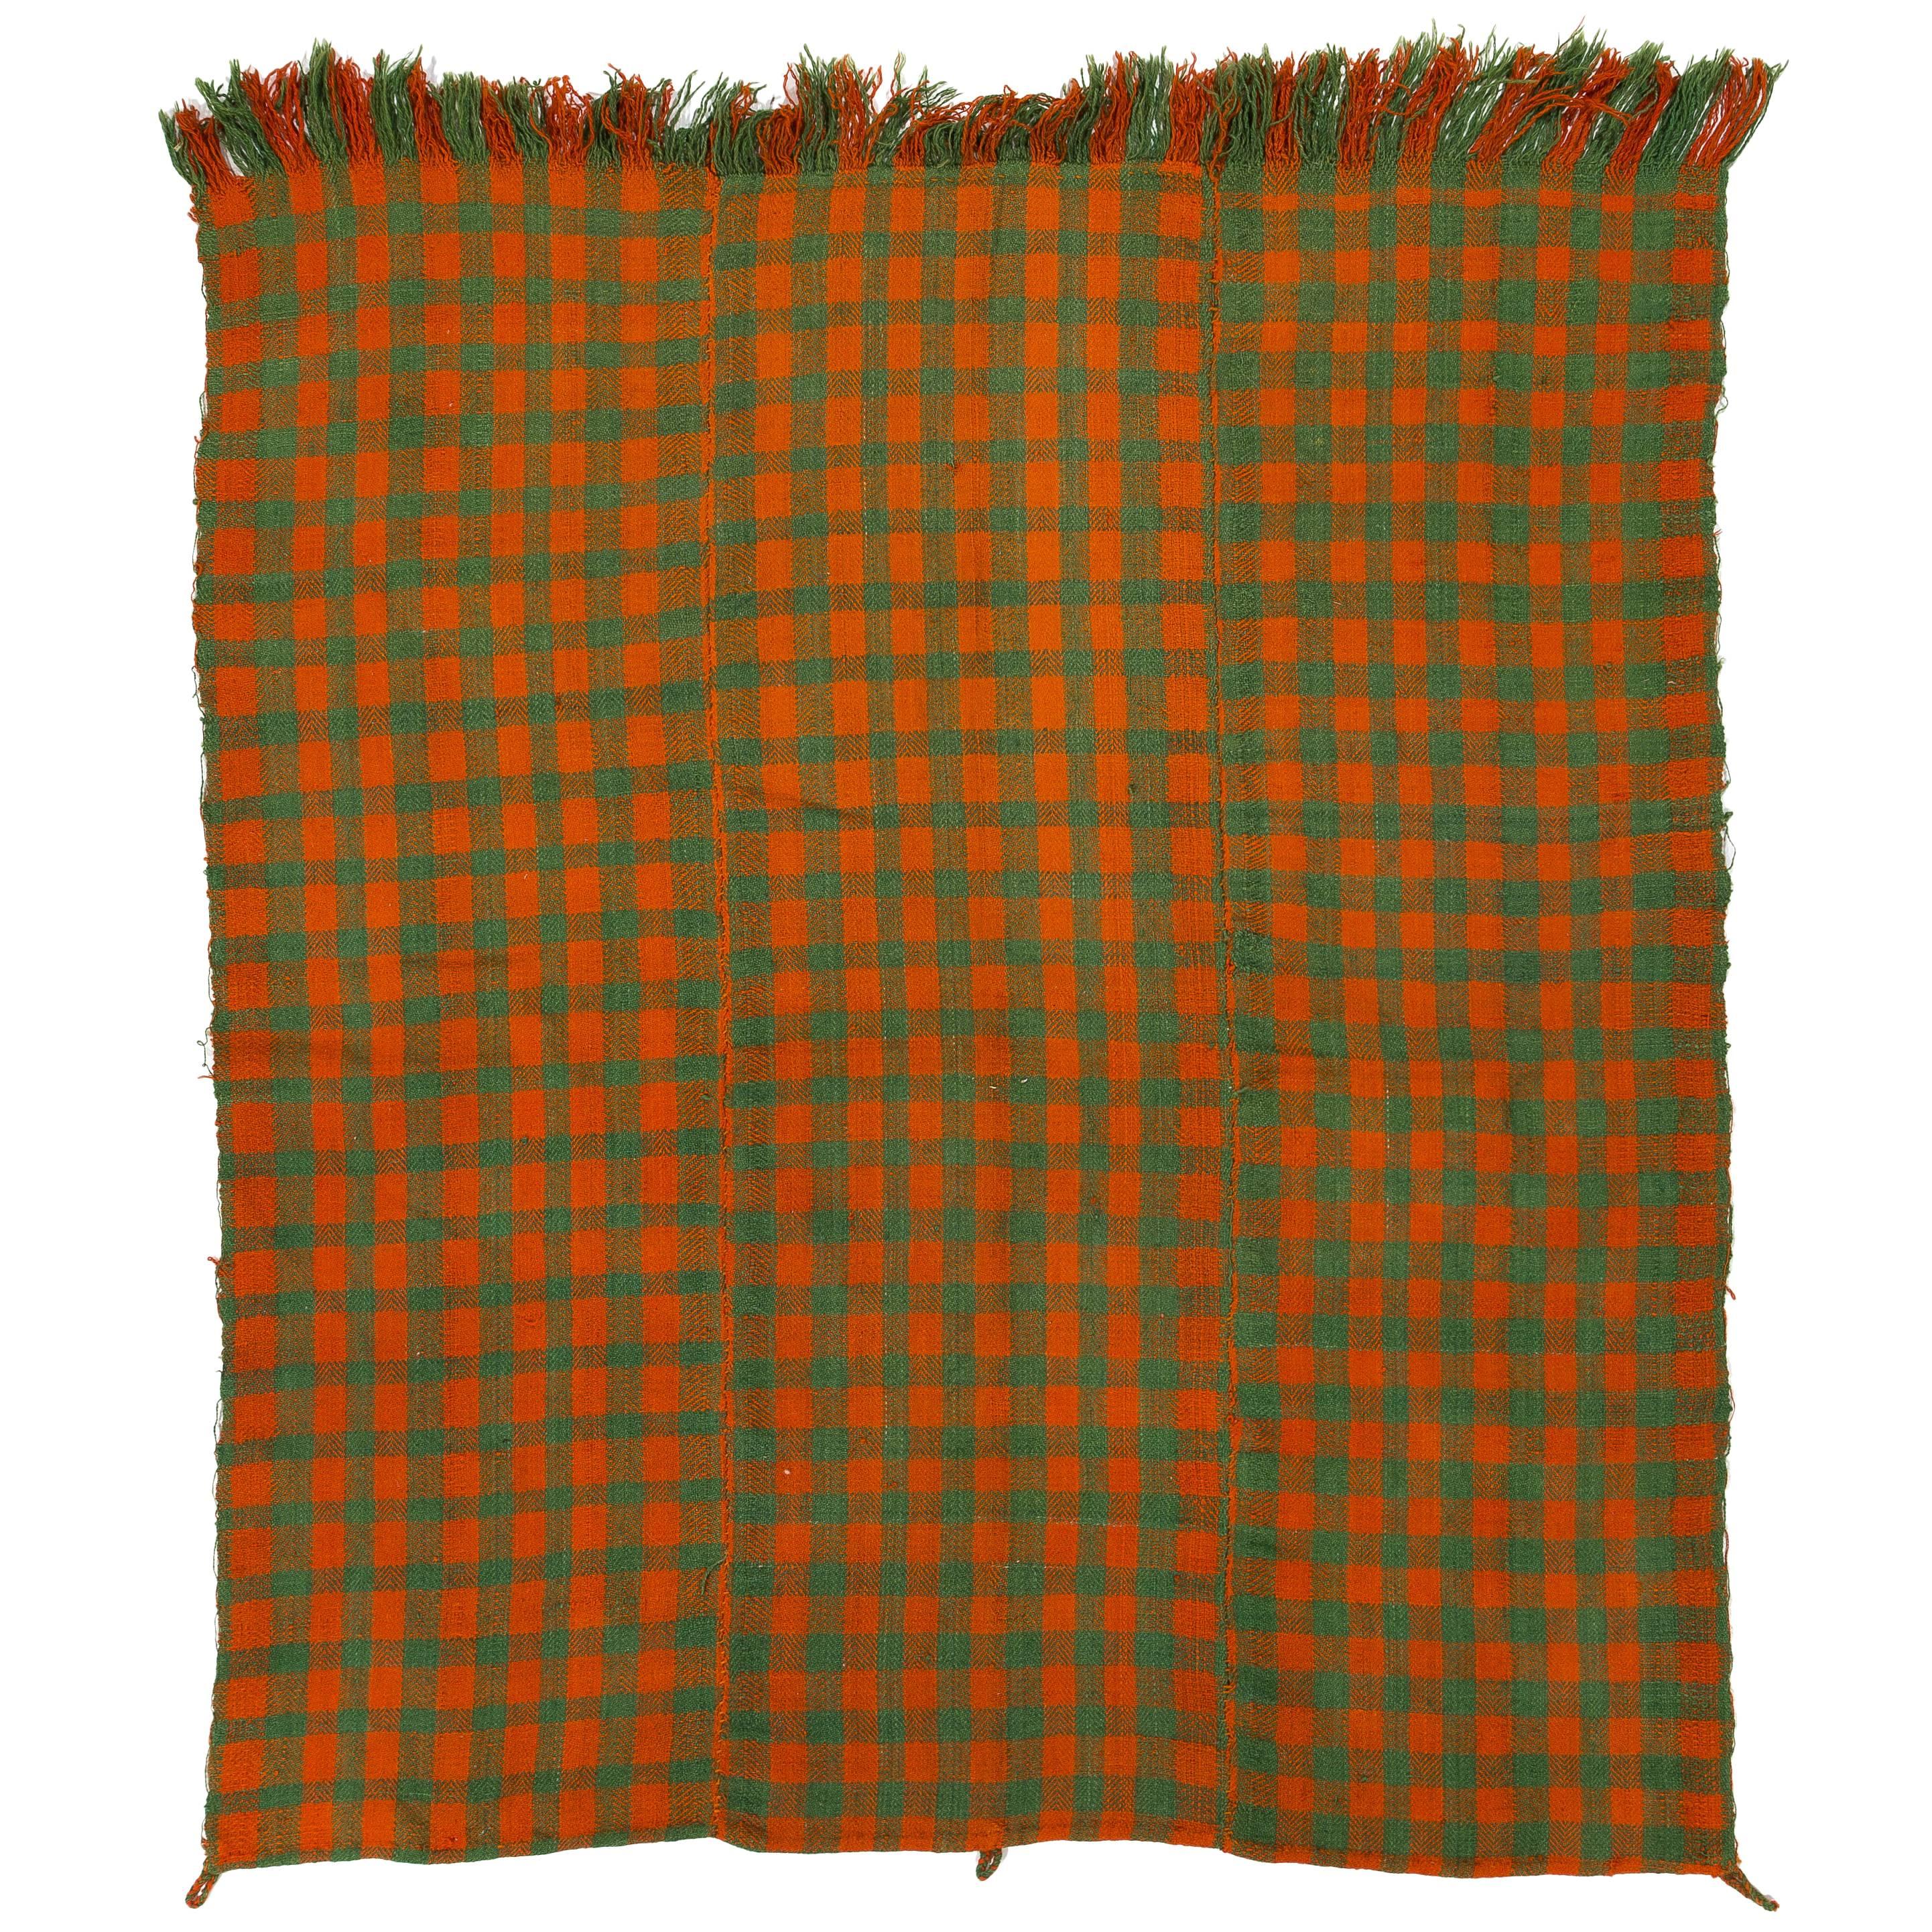 Chequered Turkish Kilim in Orange and Green Colors